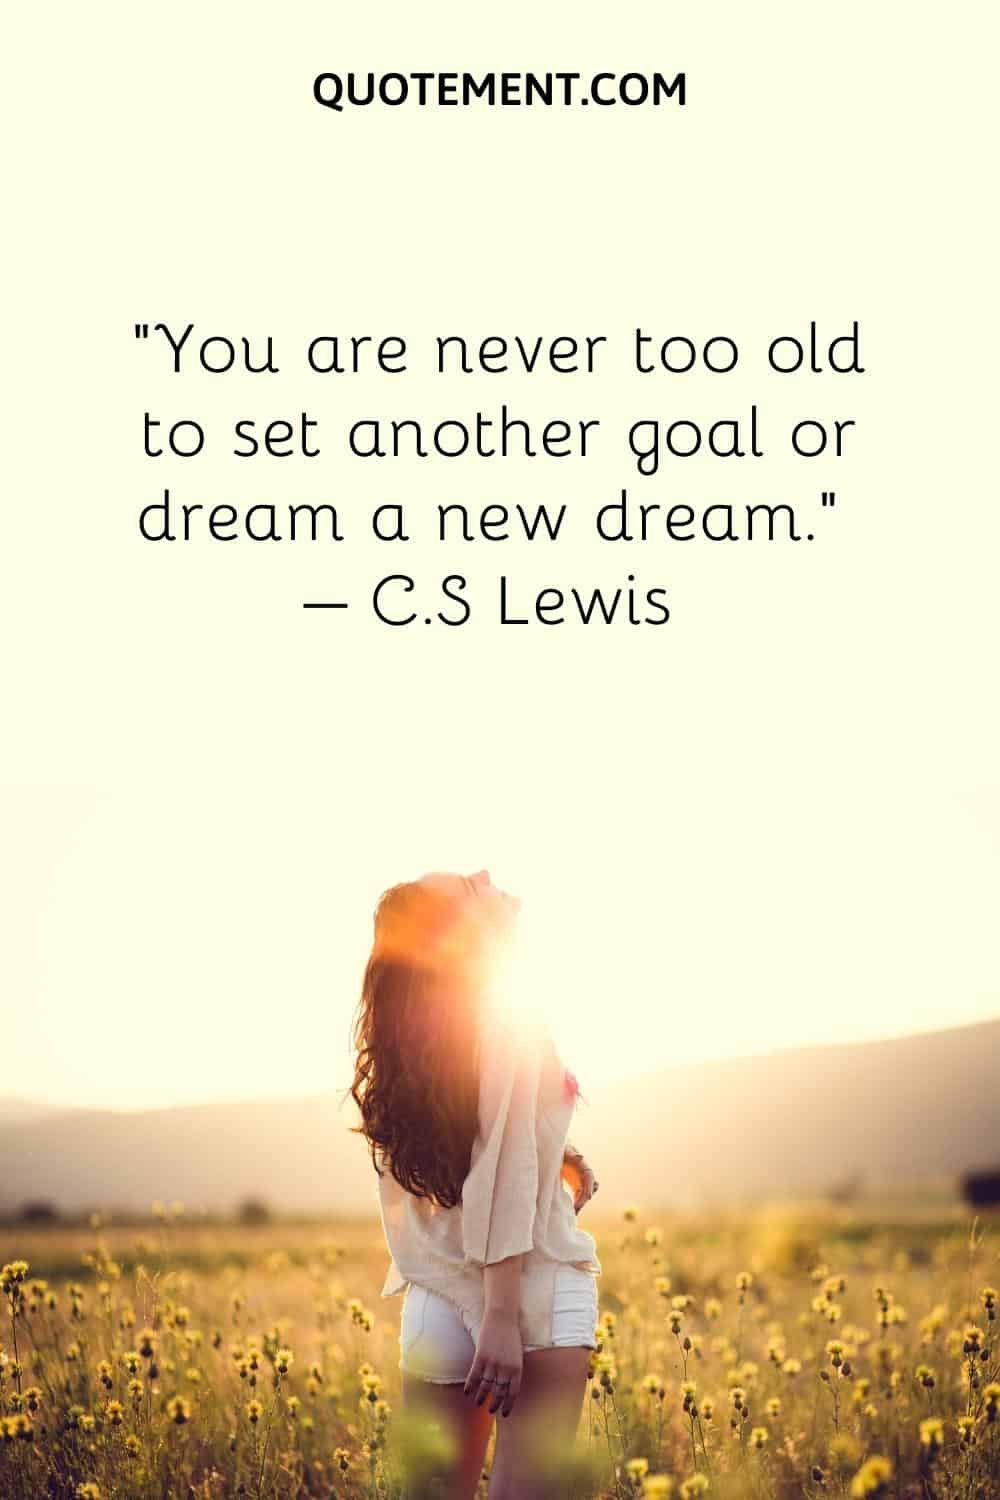 You are never too old to set another goal or dream a new dream